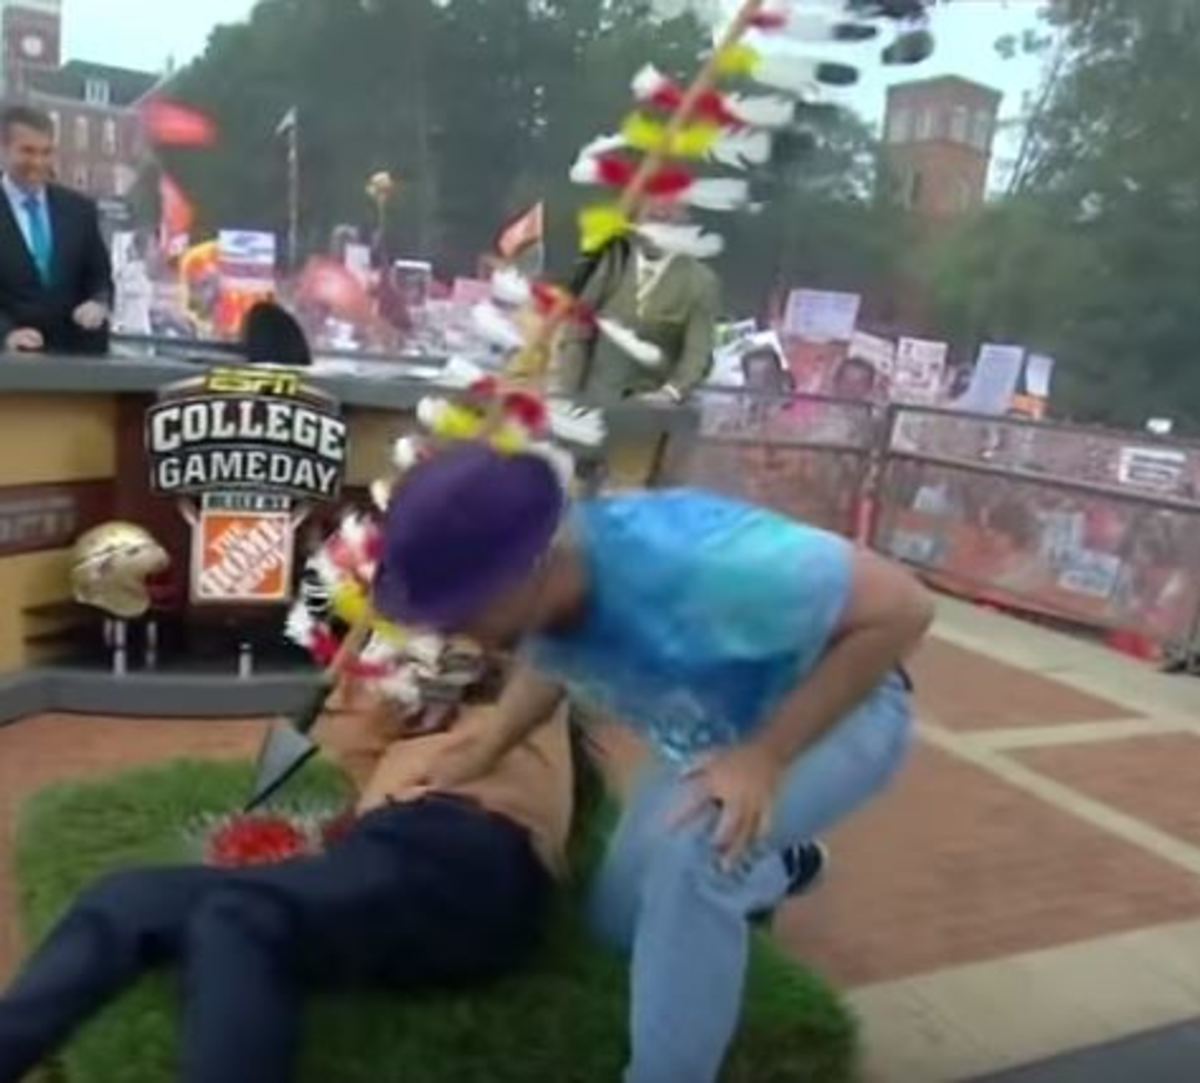 Bill Murray and Lee Corso on the set of College Gameday.